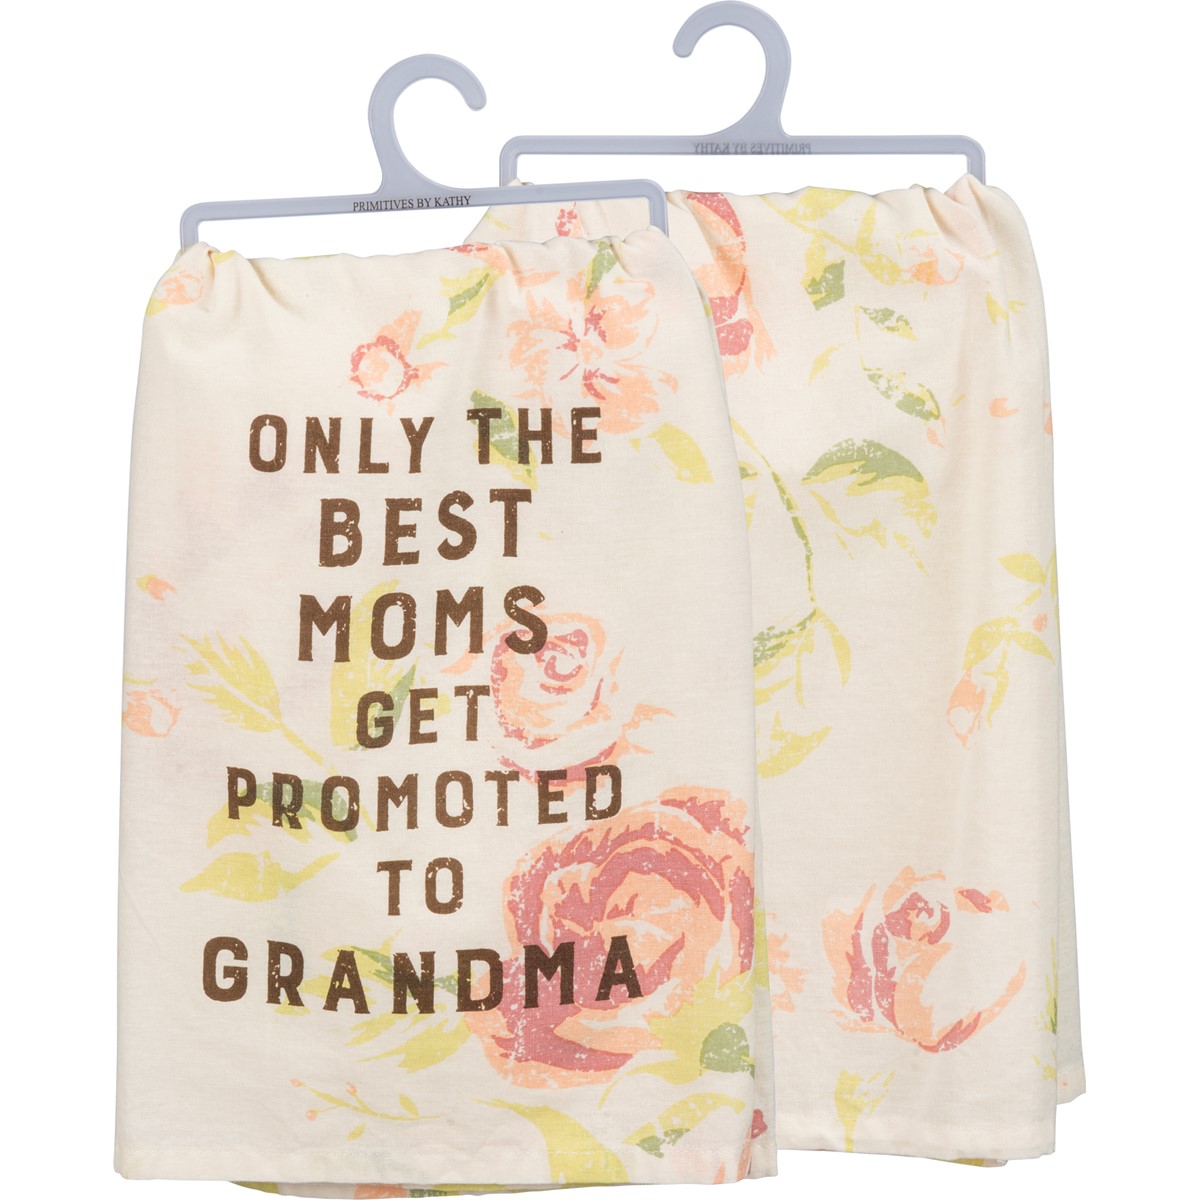 Best Moms Get Promoted To Grandma Kitchen Towel - Cotton